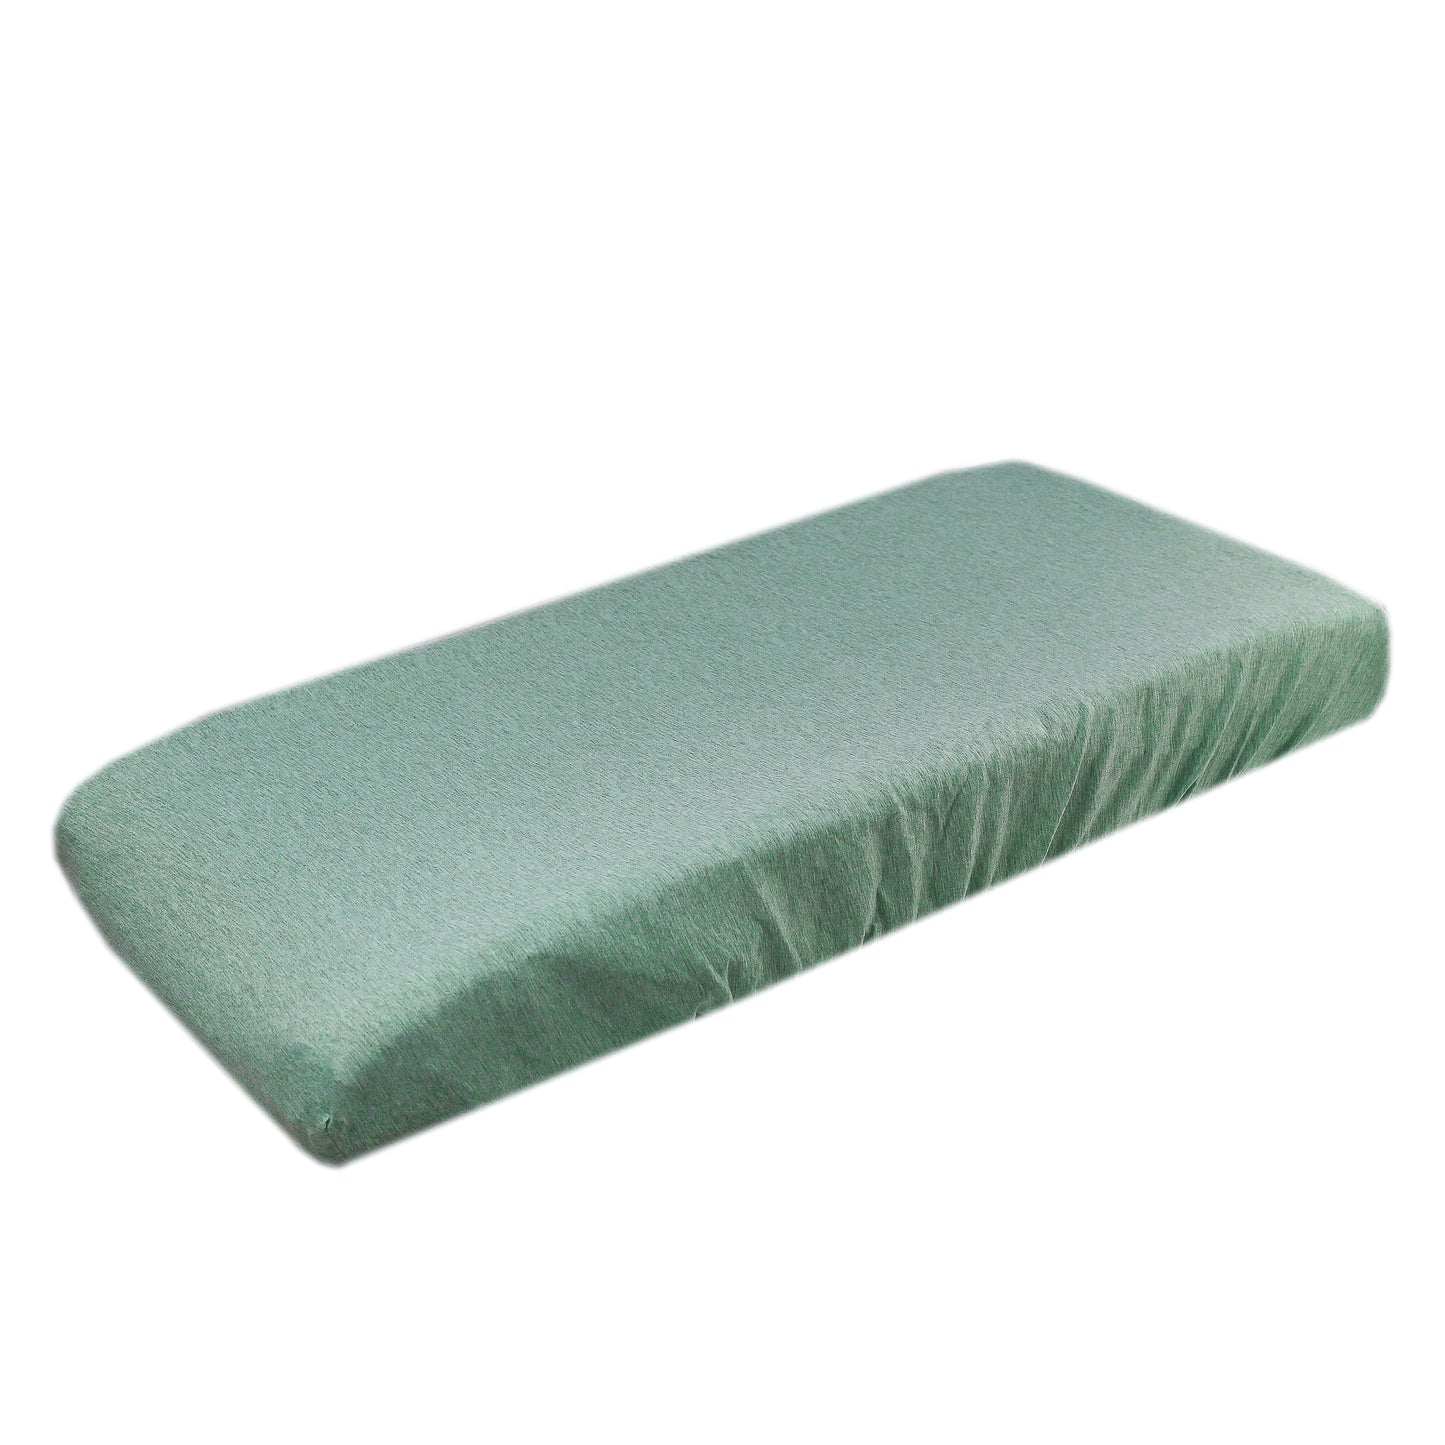 Emerson Premium Knit Changing Pad Cover